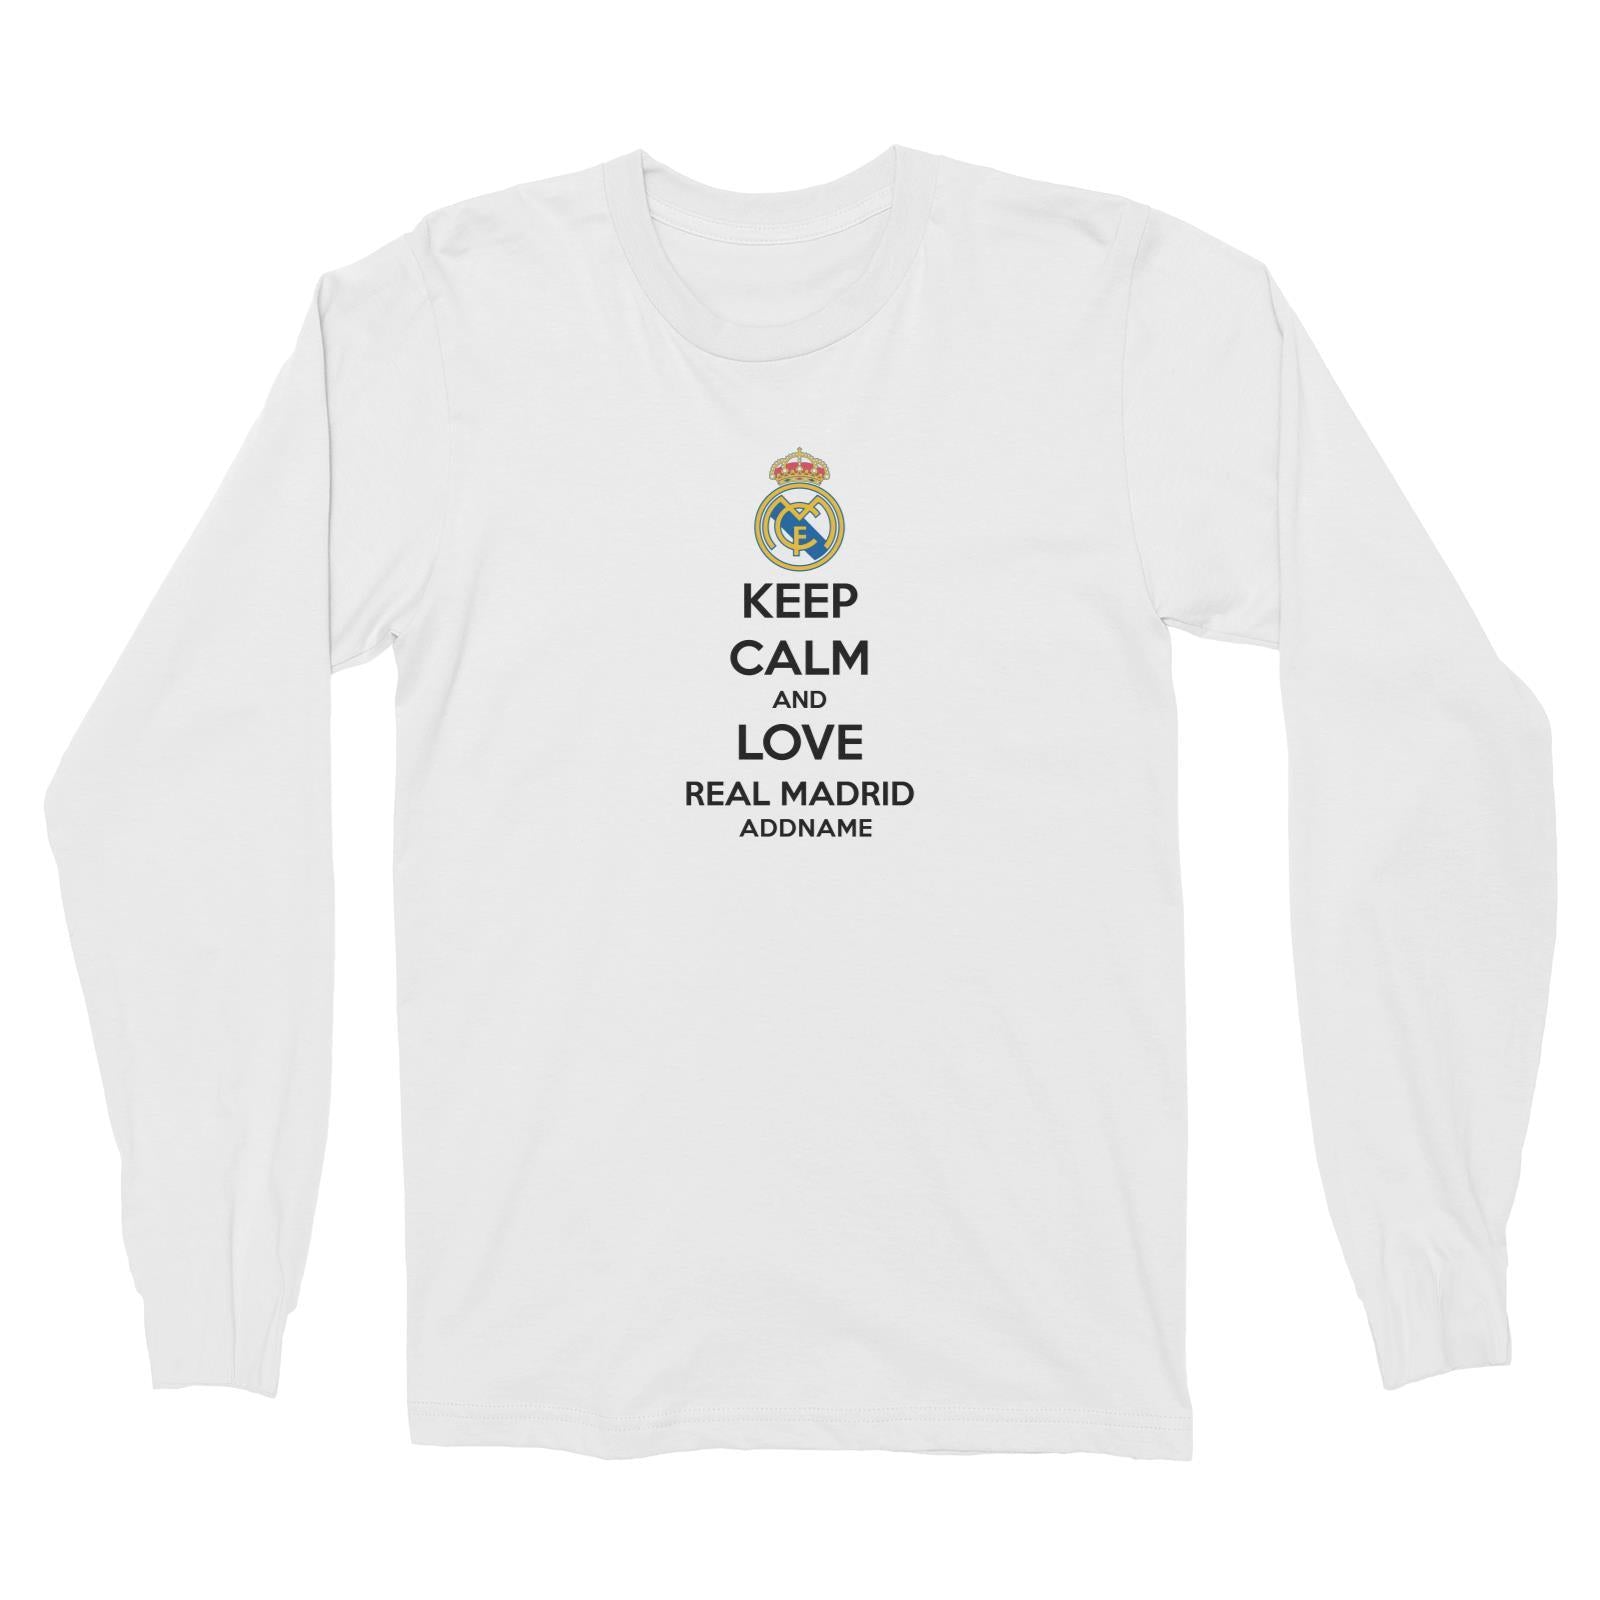 Real Madrid Football Keep Calm And Love Series Addname Unisex T-Shirt